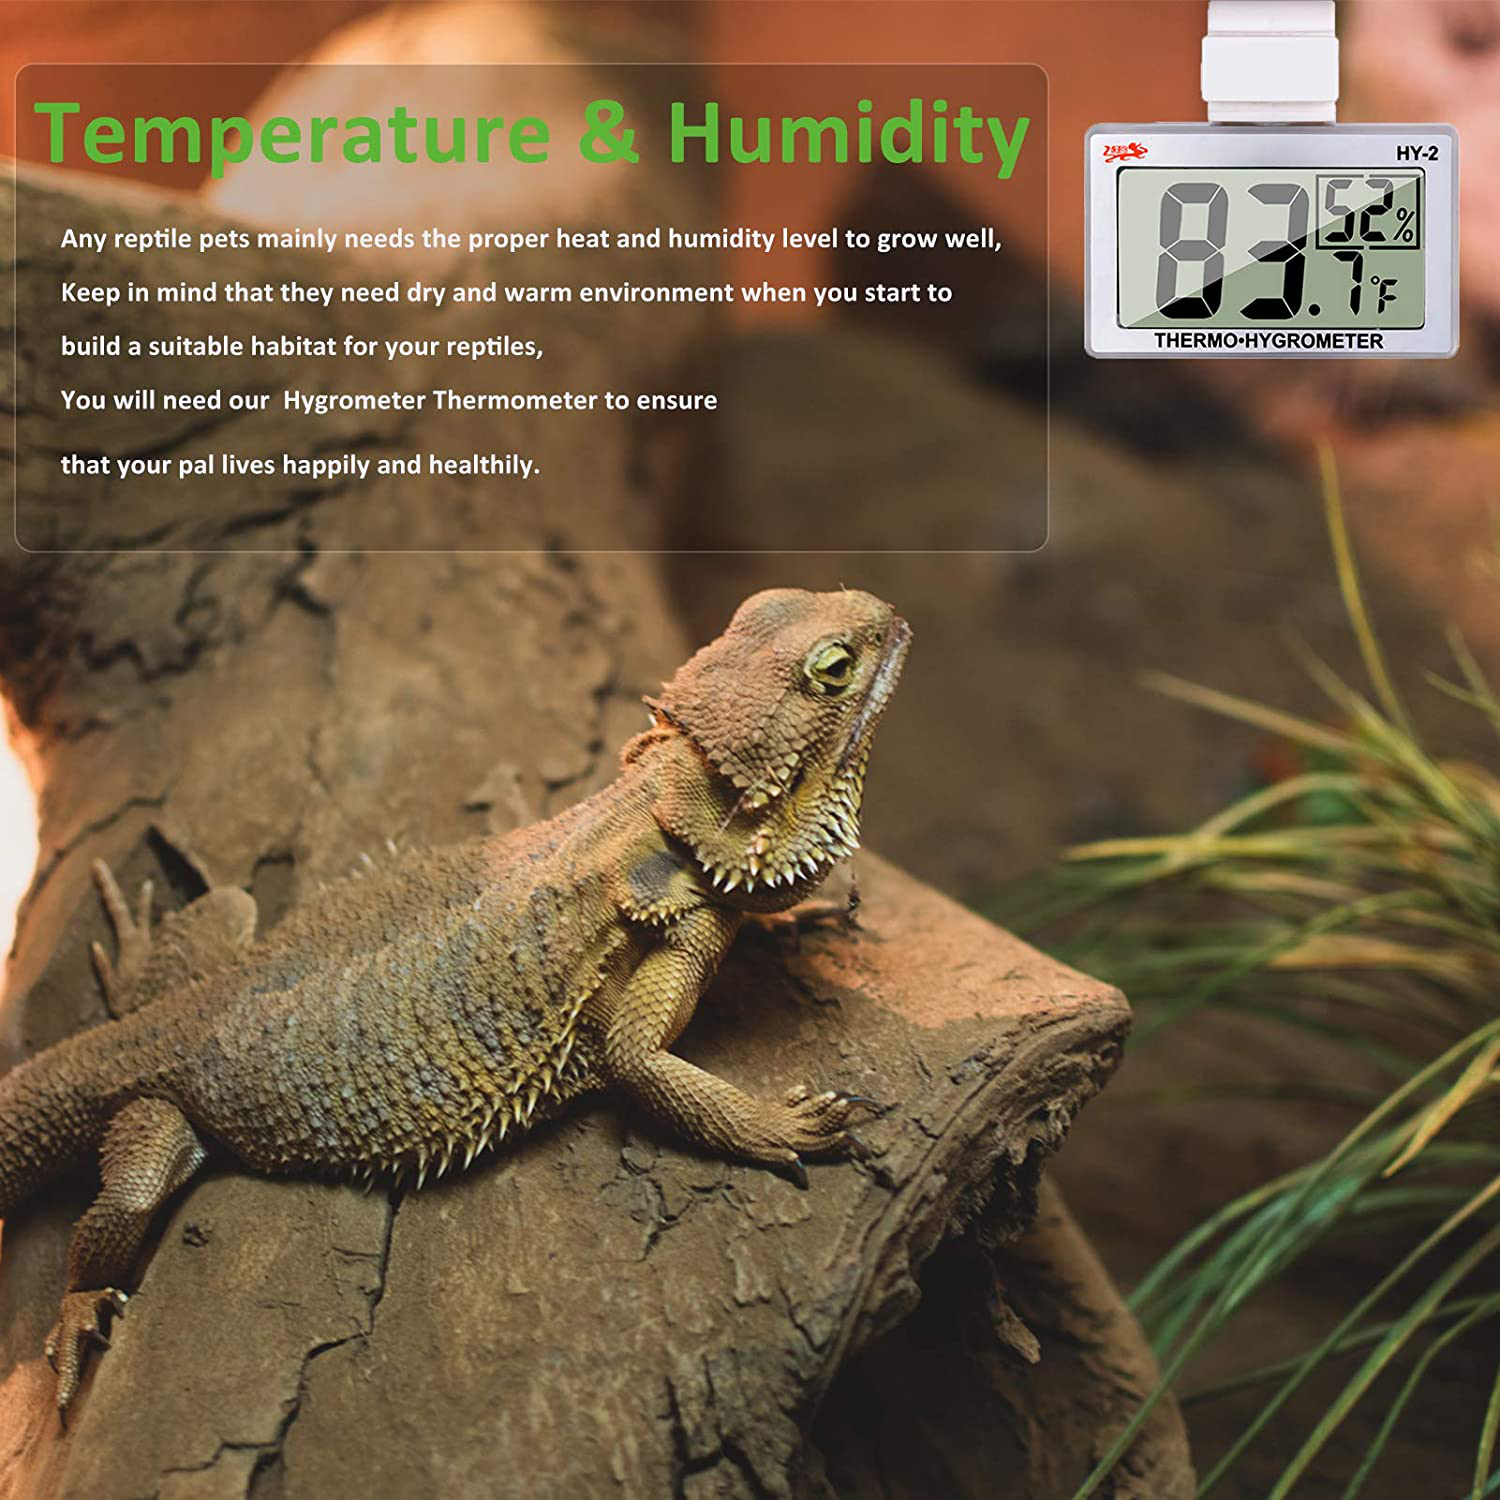 capetsma Reptile Thermometer, Digital Thermometer Hygrometer for Reptile  Terrarium, Temperature and Humidity Monitor in Acrylic and Glass Terrarium,Accurate  - Easy to Read - No Messy Wires (1 Pack)